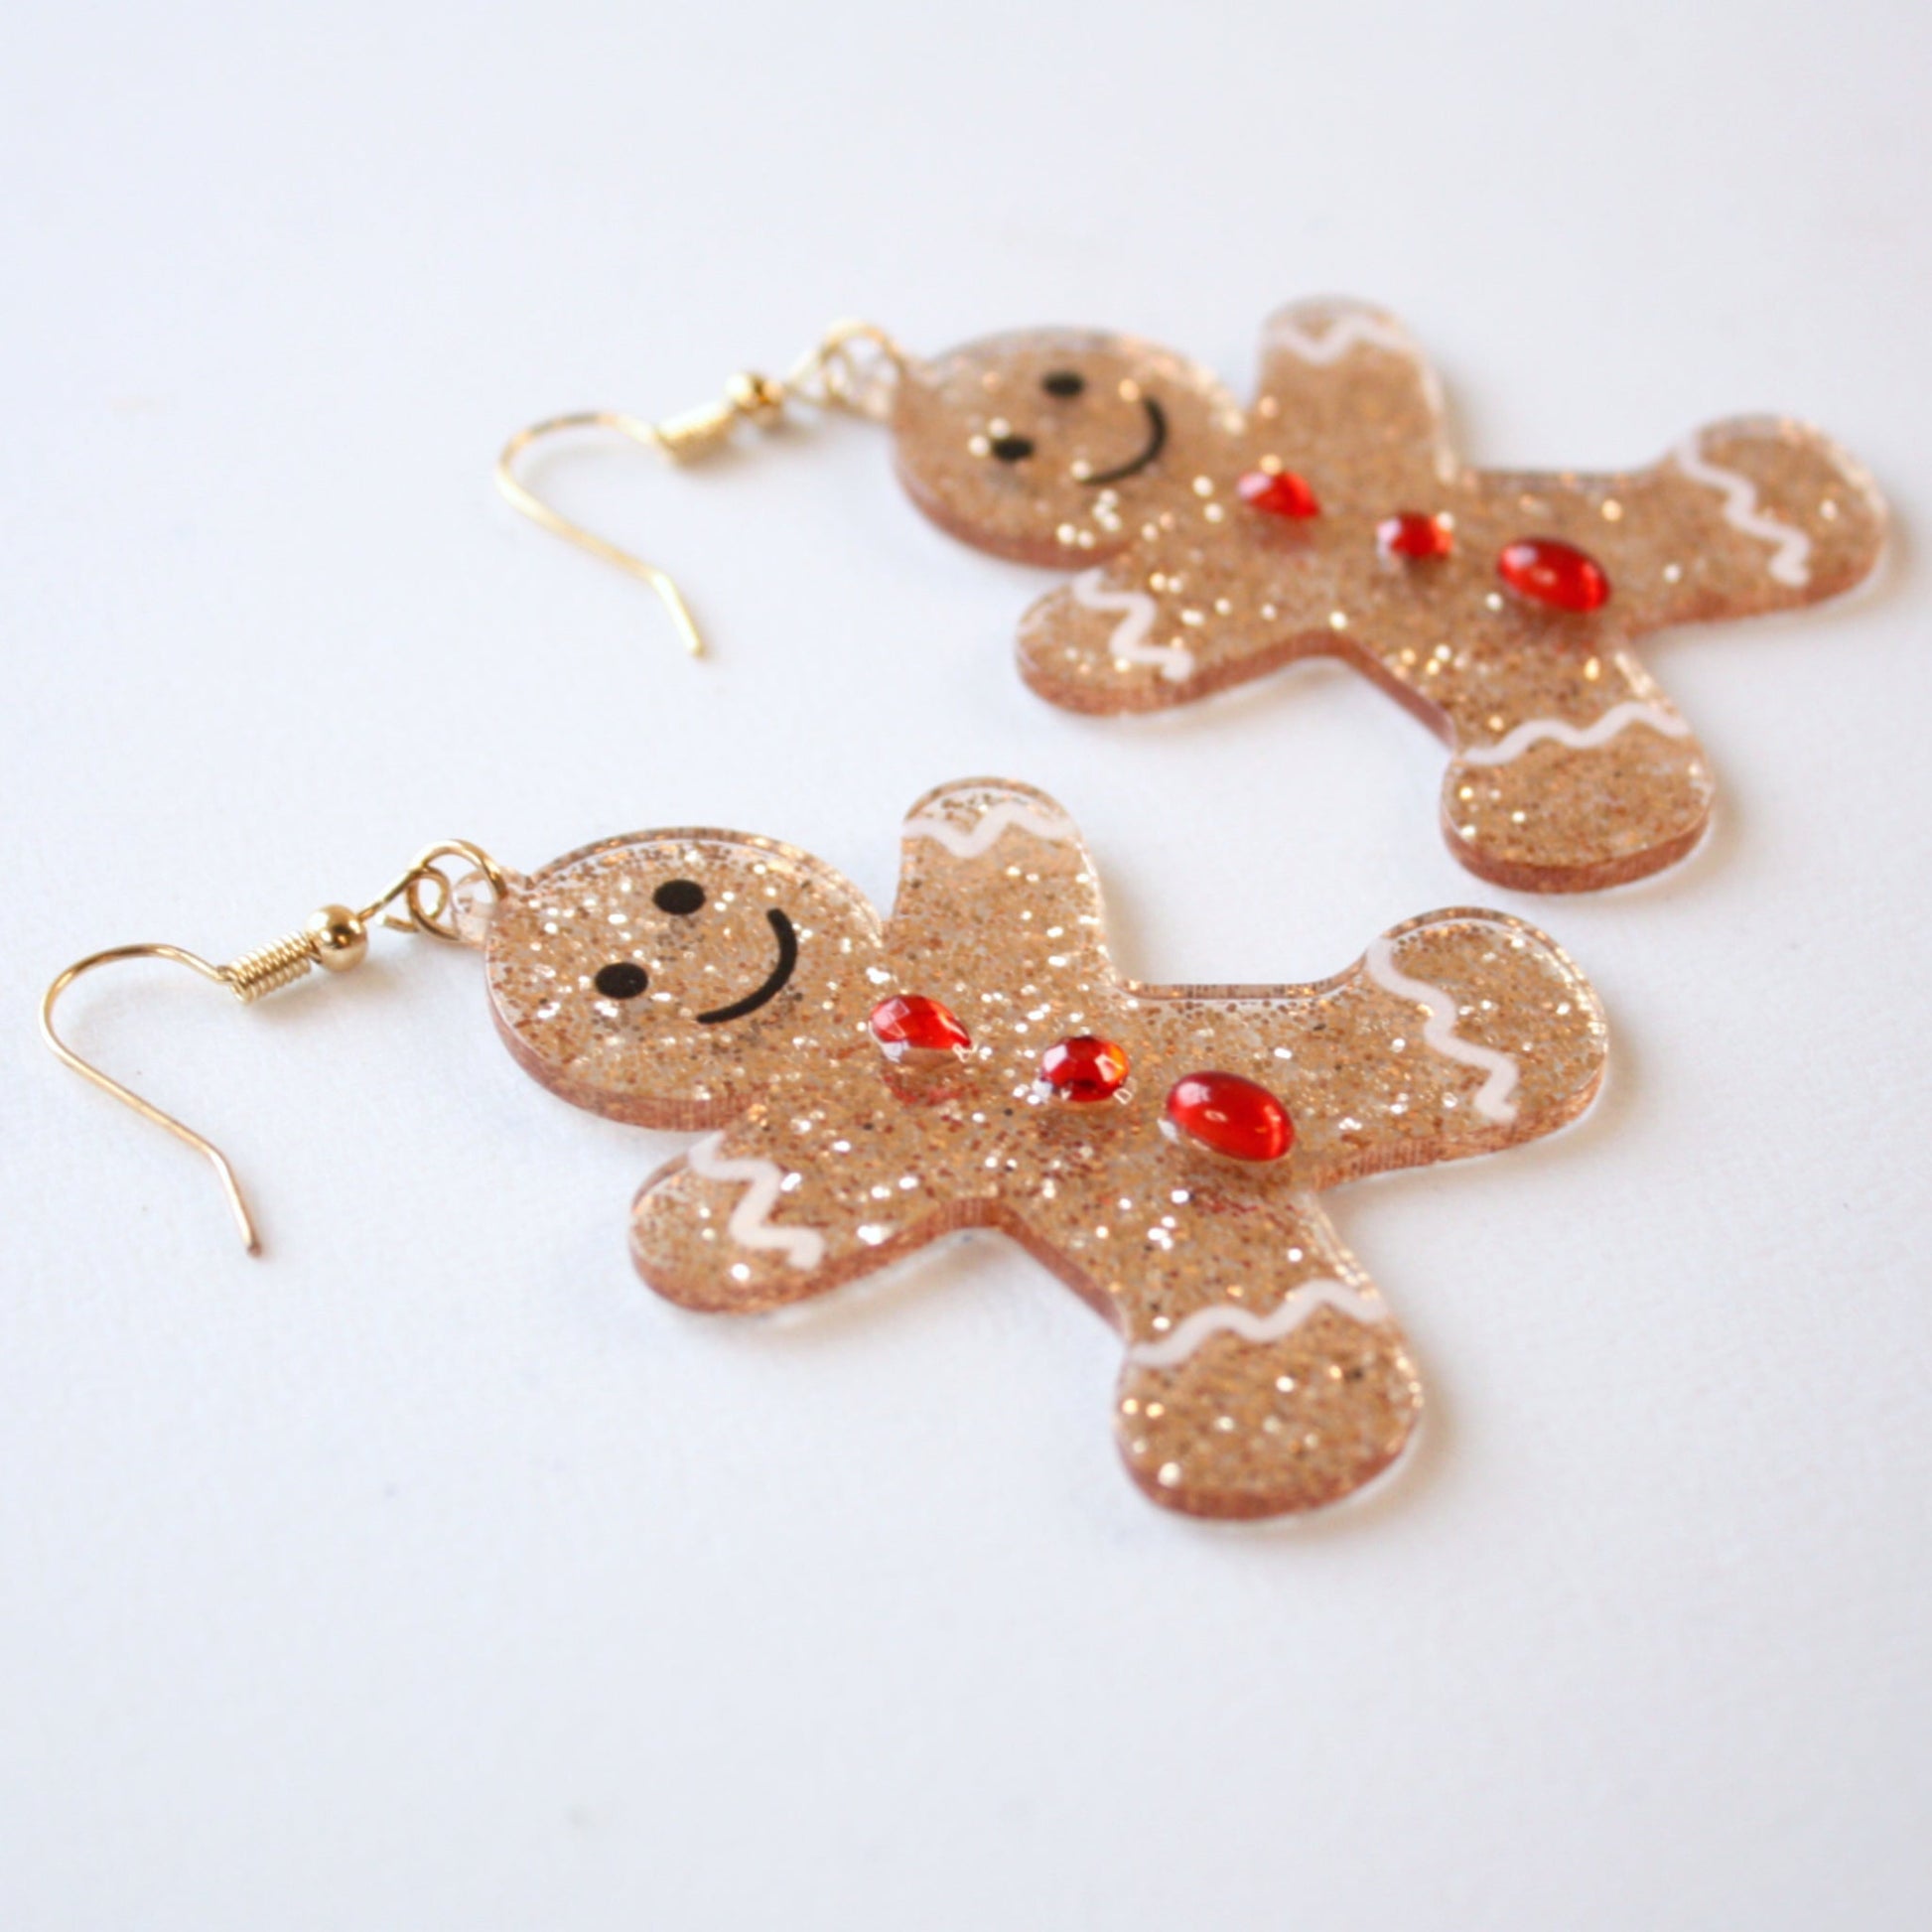 Sparkly Gingerbread Christmas Earrings - Made in the USA